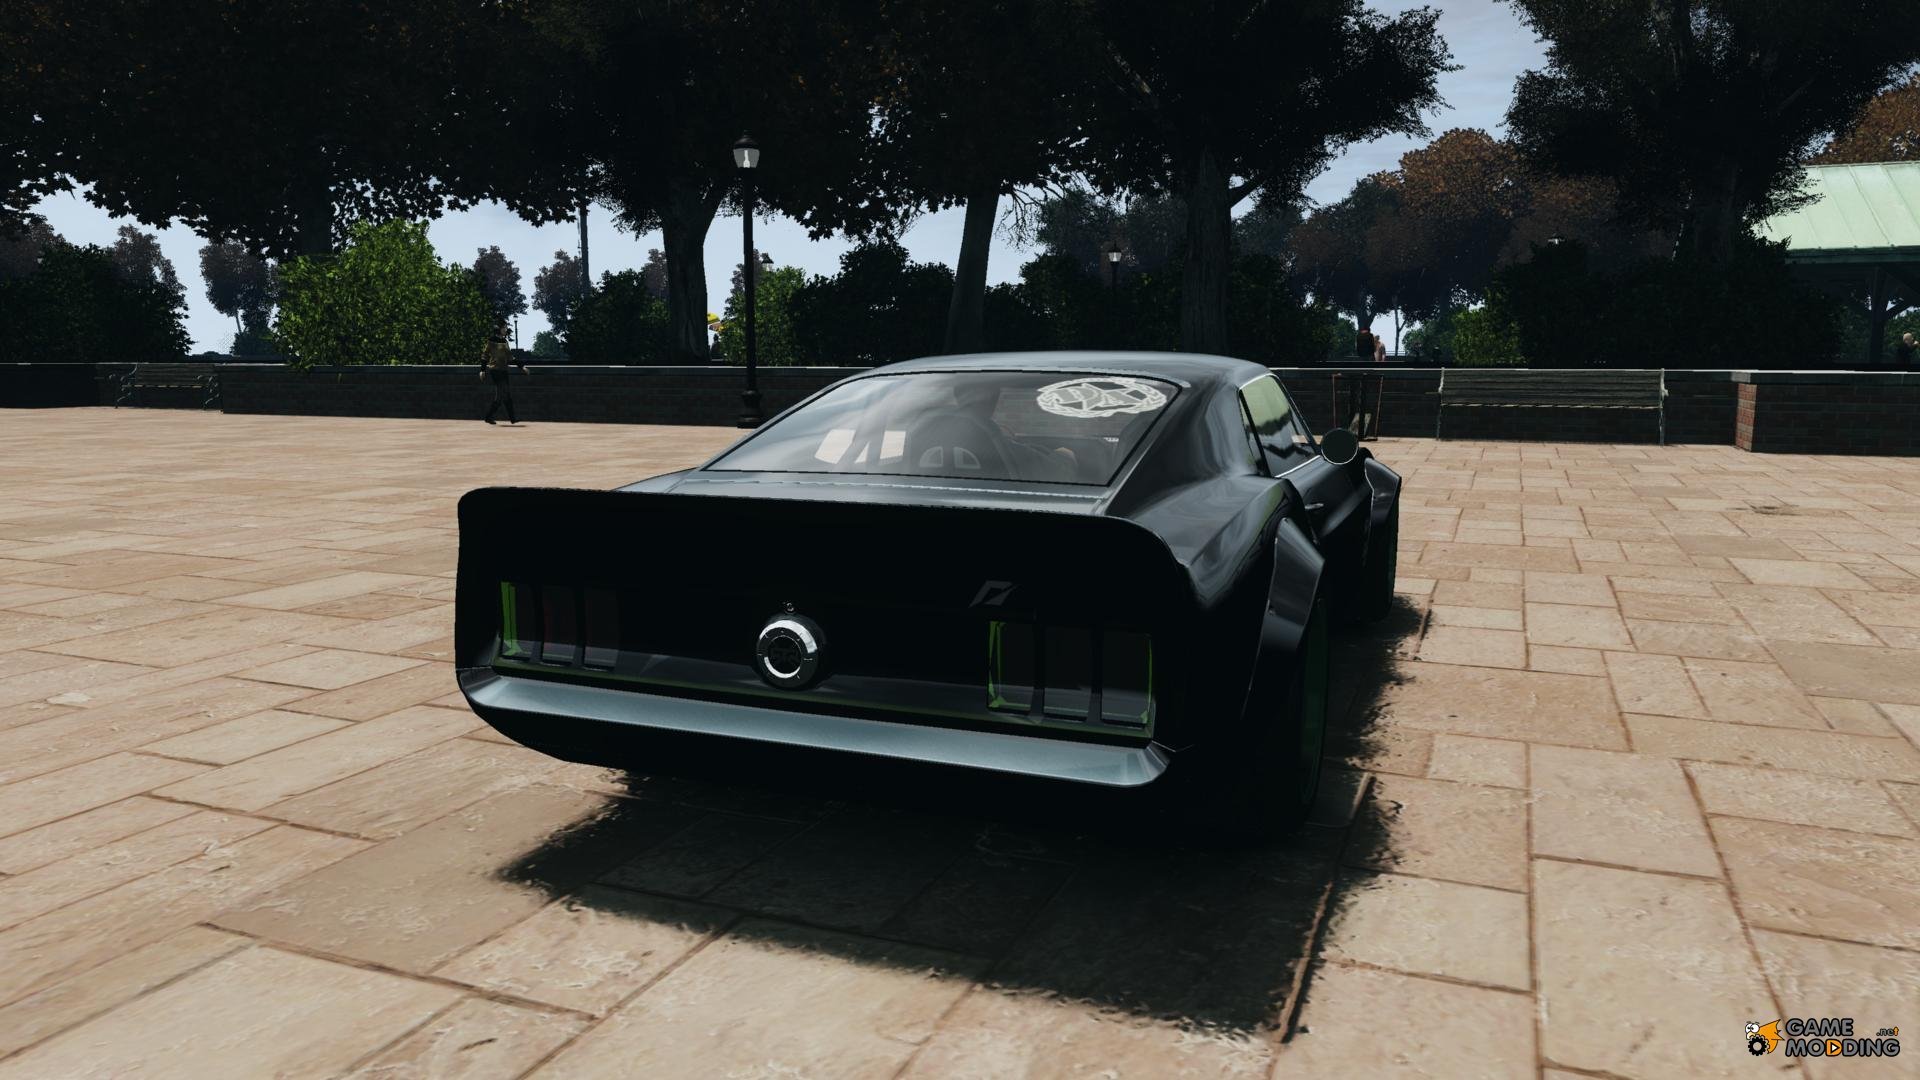 1969, Ford, Mustang, Rtr x, Drift, Race, Racing, Hot, Rod, Rods, Muscle, Classic, Need, Speed, Rtr, Gta, Grand, Theft, Auto Wallpaper